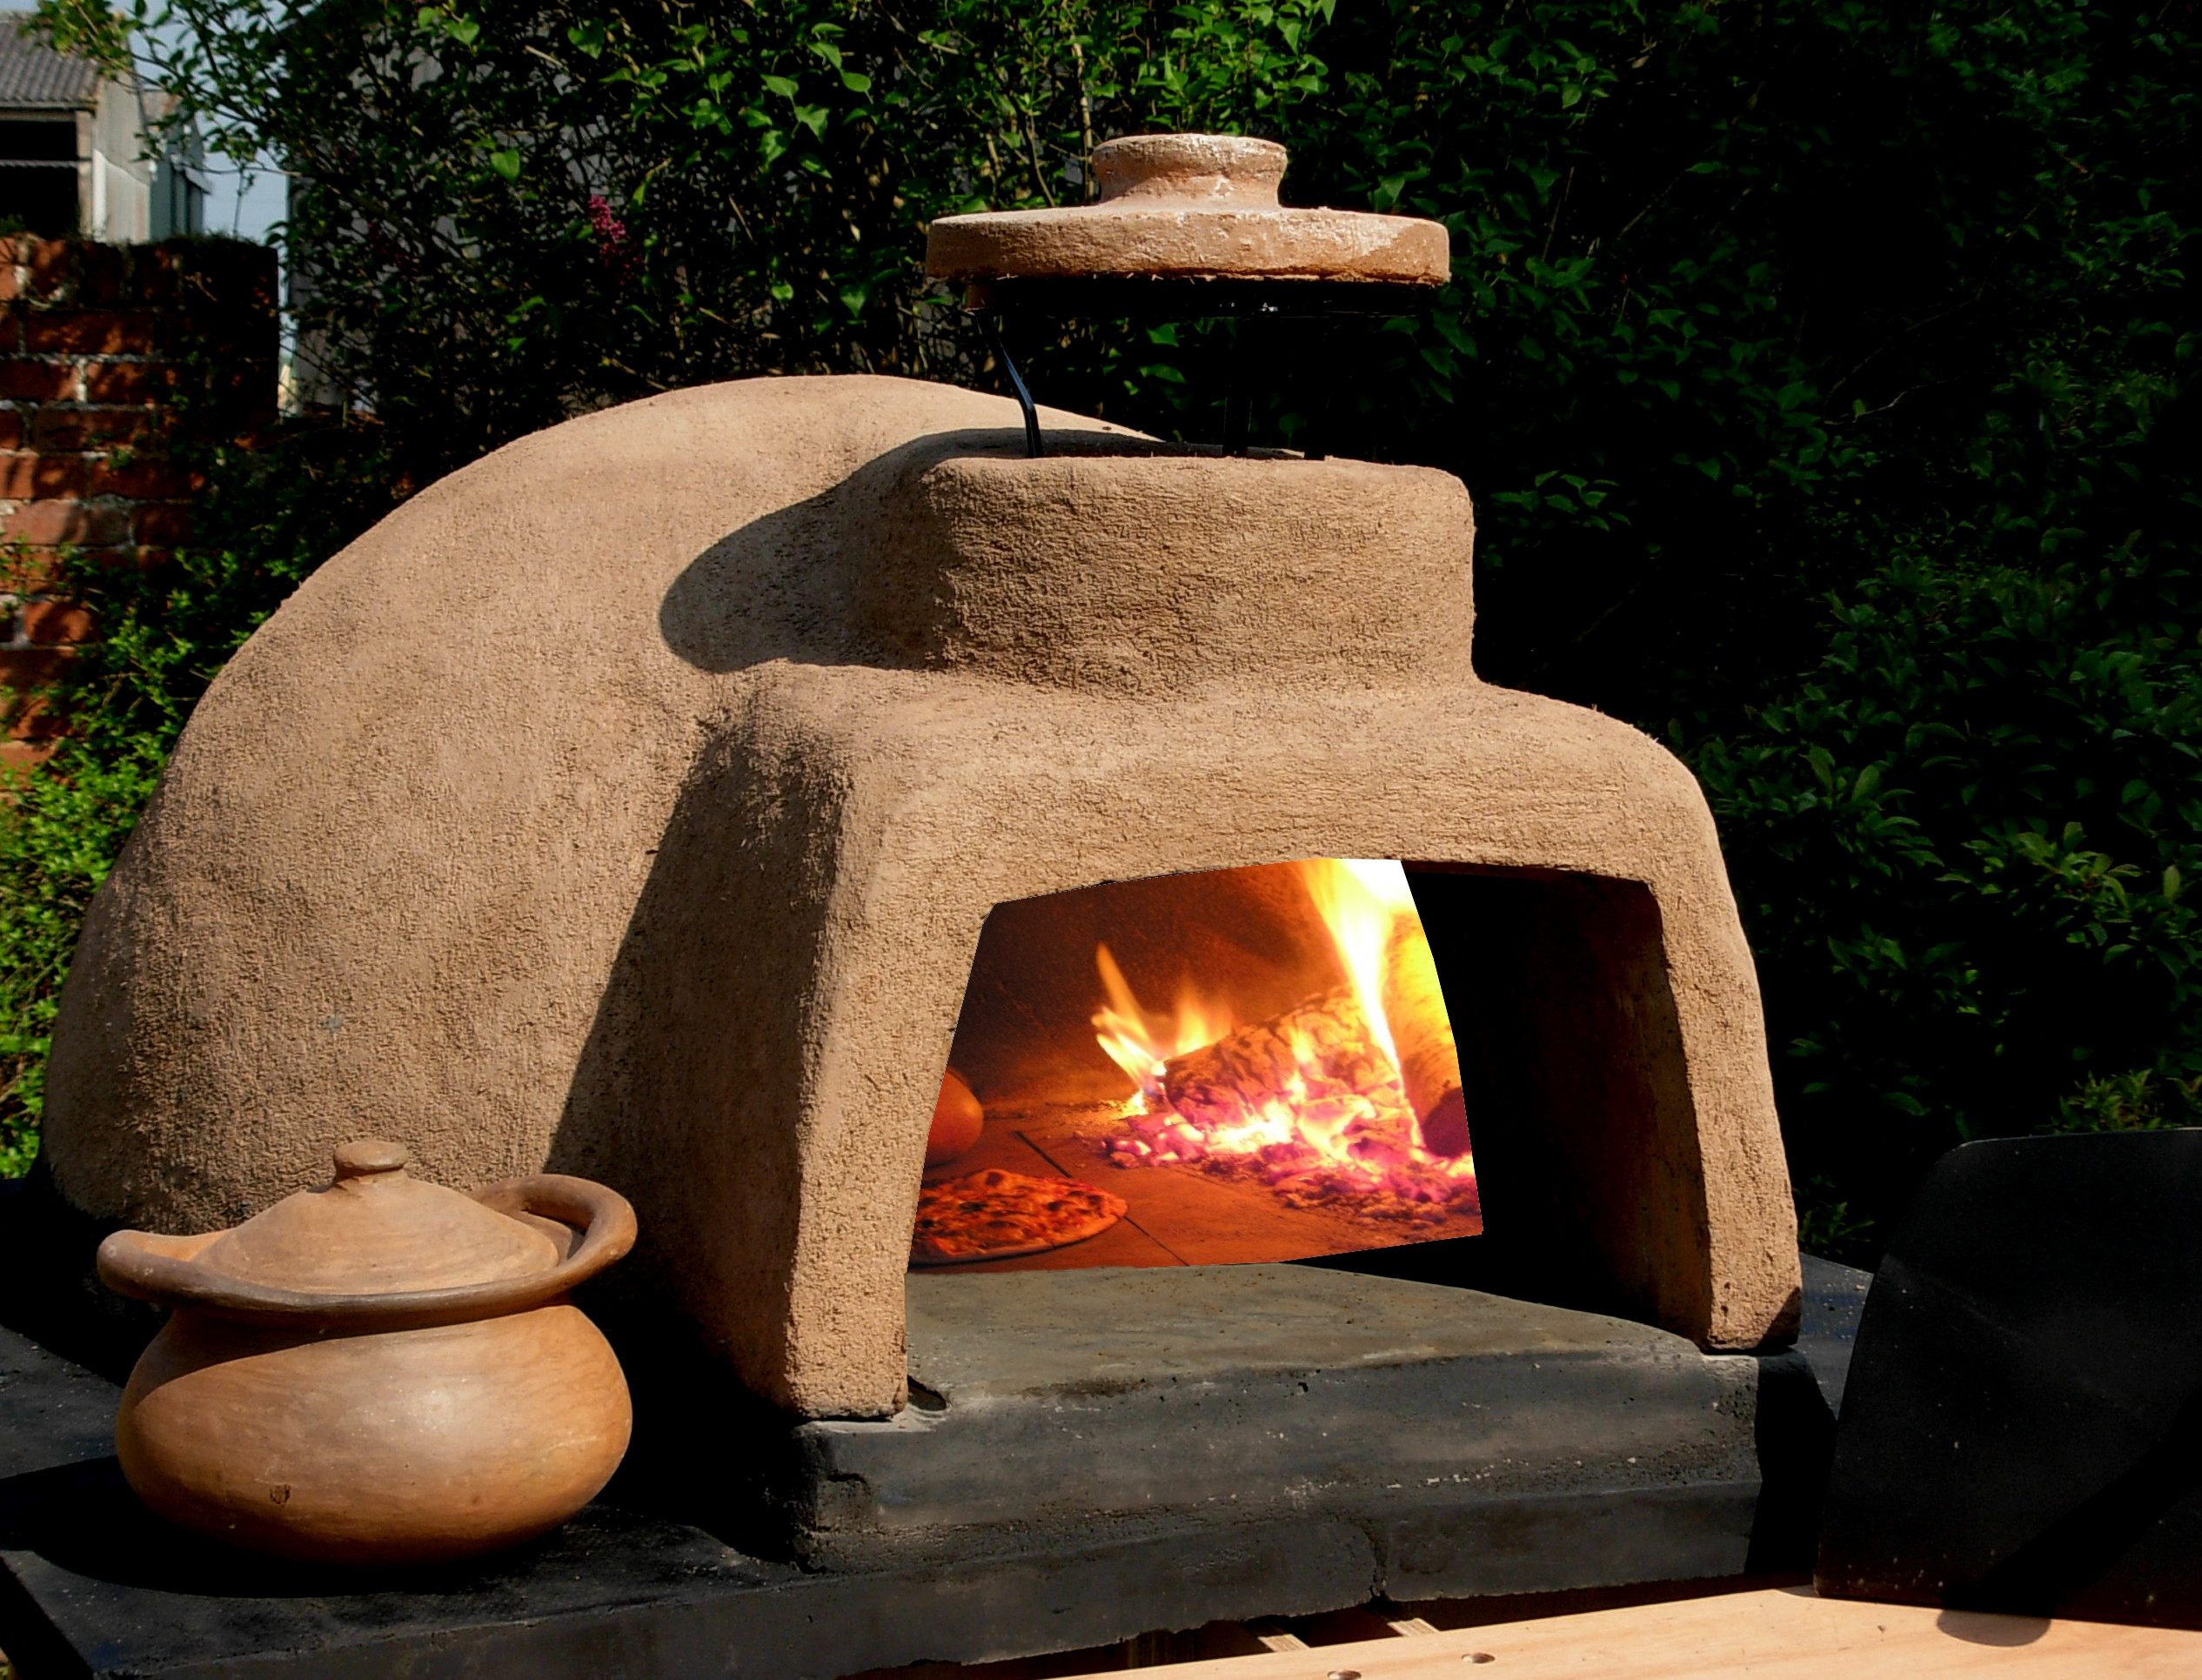 DIY Pizza Oven Plans Free
 15 DIY Pizza Oven Plans For Outdoors Backing – The Self